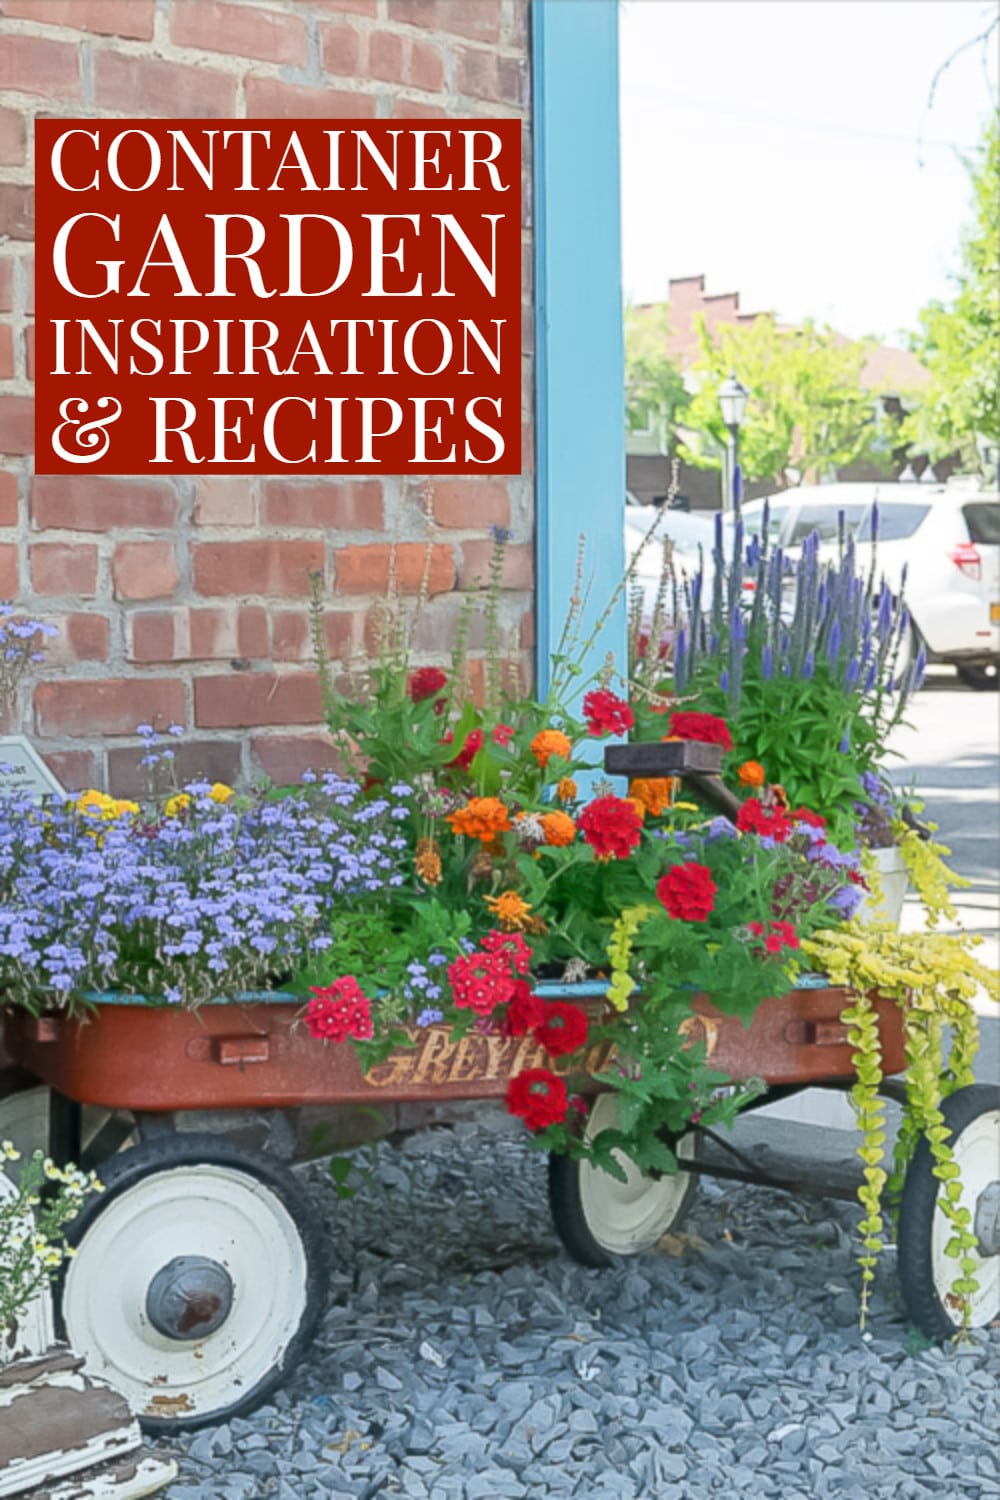 image of container garden in old red wagon